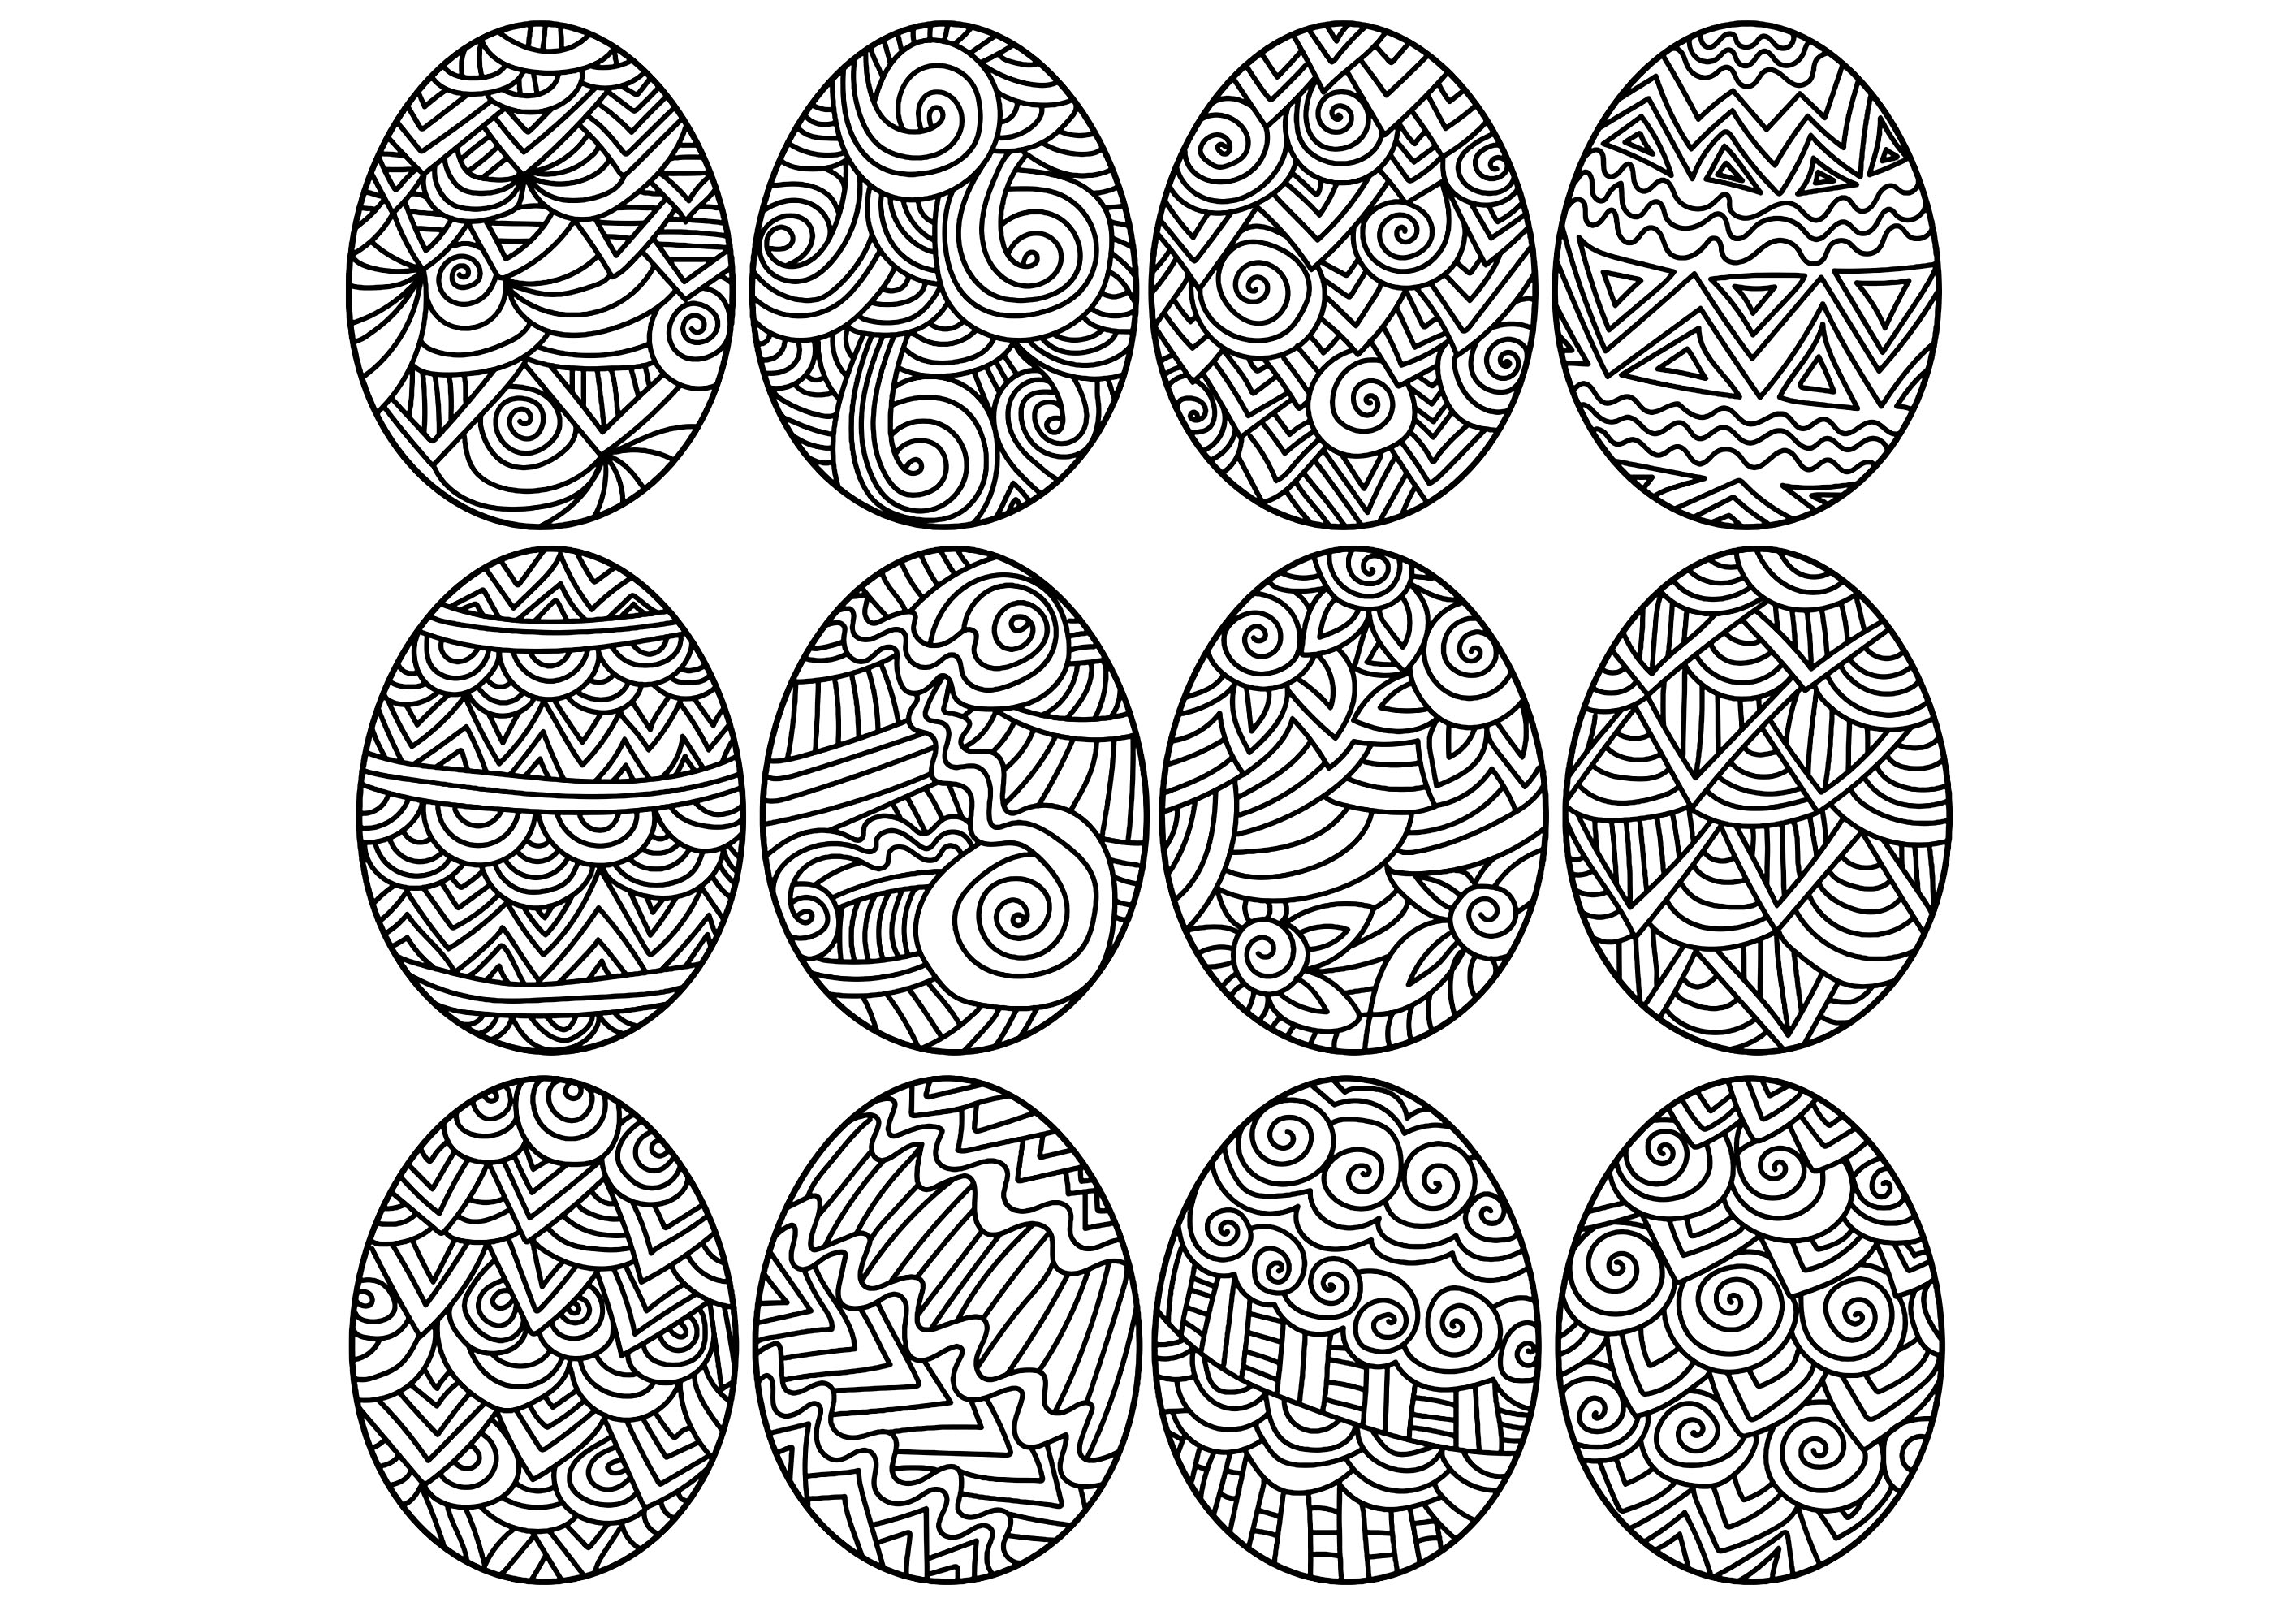 Twelve Easter eggs to color. Color these eggs, they're all different, Source : 123rf   Artist : sunnycoloring